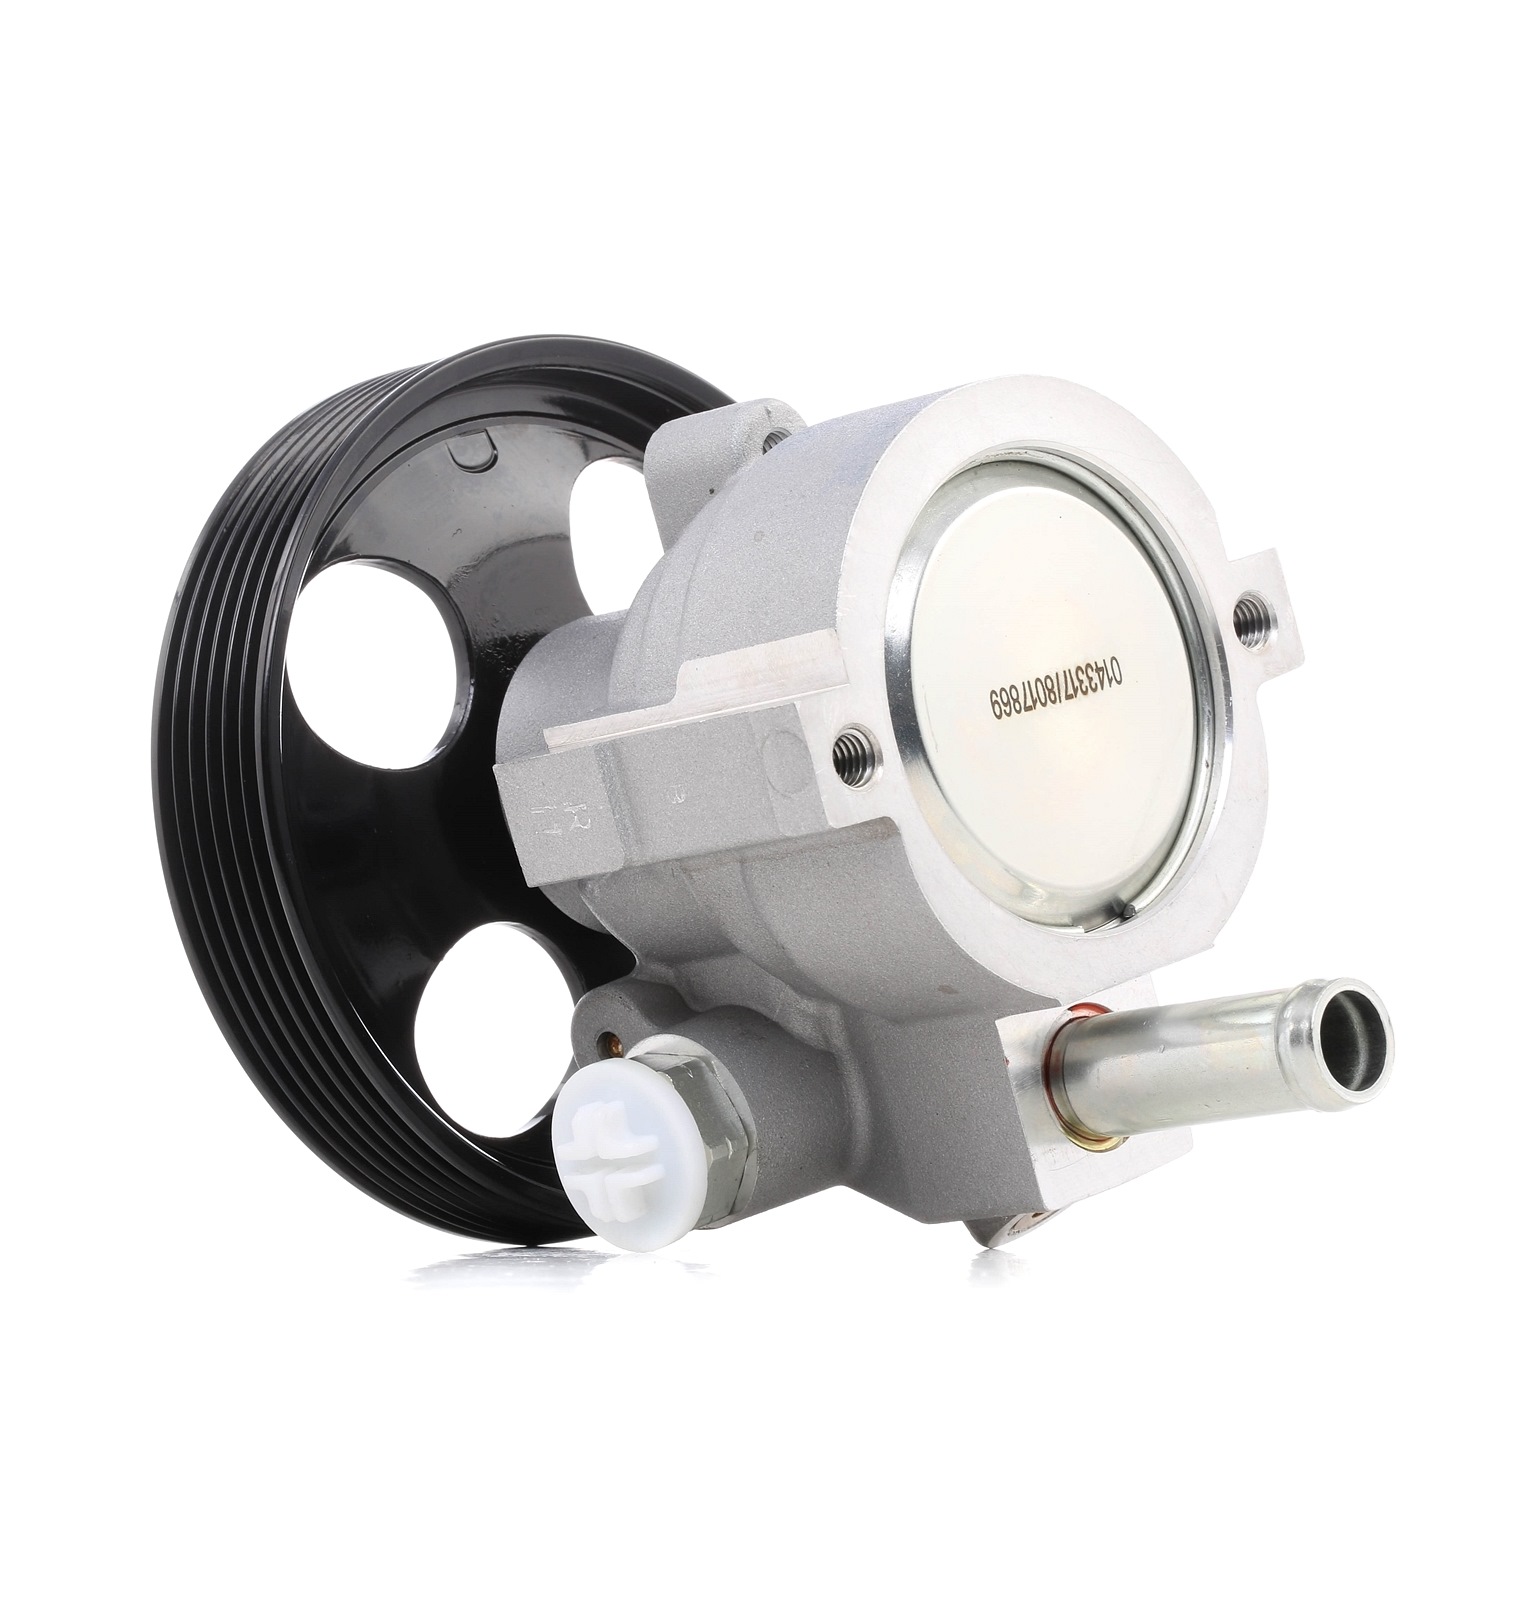 STARK SKHP-0540041 Power steering pump Hydraulic, Number of ribs: 6, Belt Pulley Ø: 130 mm, for left-hand/right-hand drive vehicles